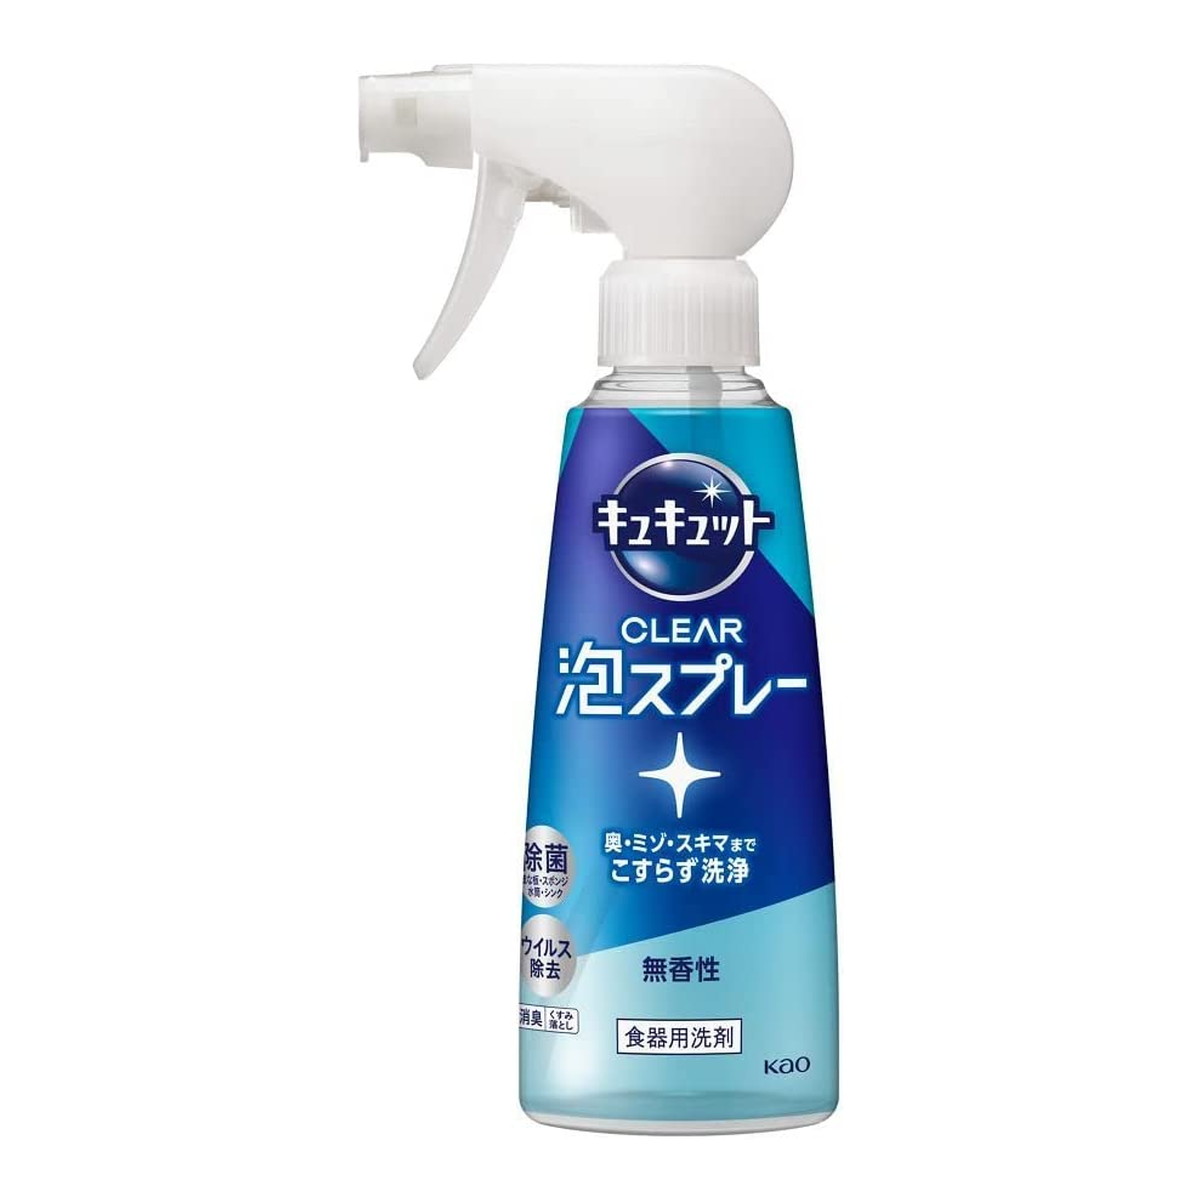 Kao キュキュット CLEAR 泡スプレー 無香性 本体 280ml ×5 キュキュット 台所用洗剤の商品画像